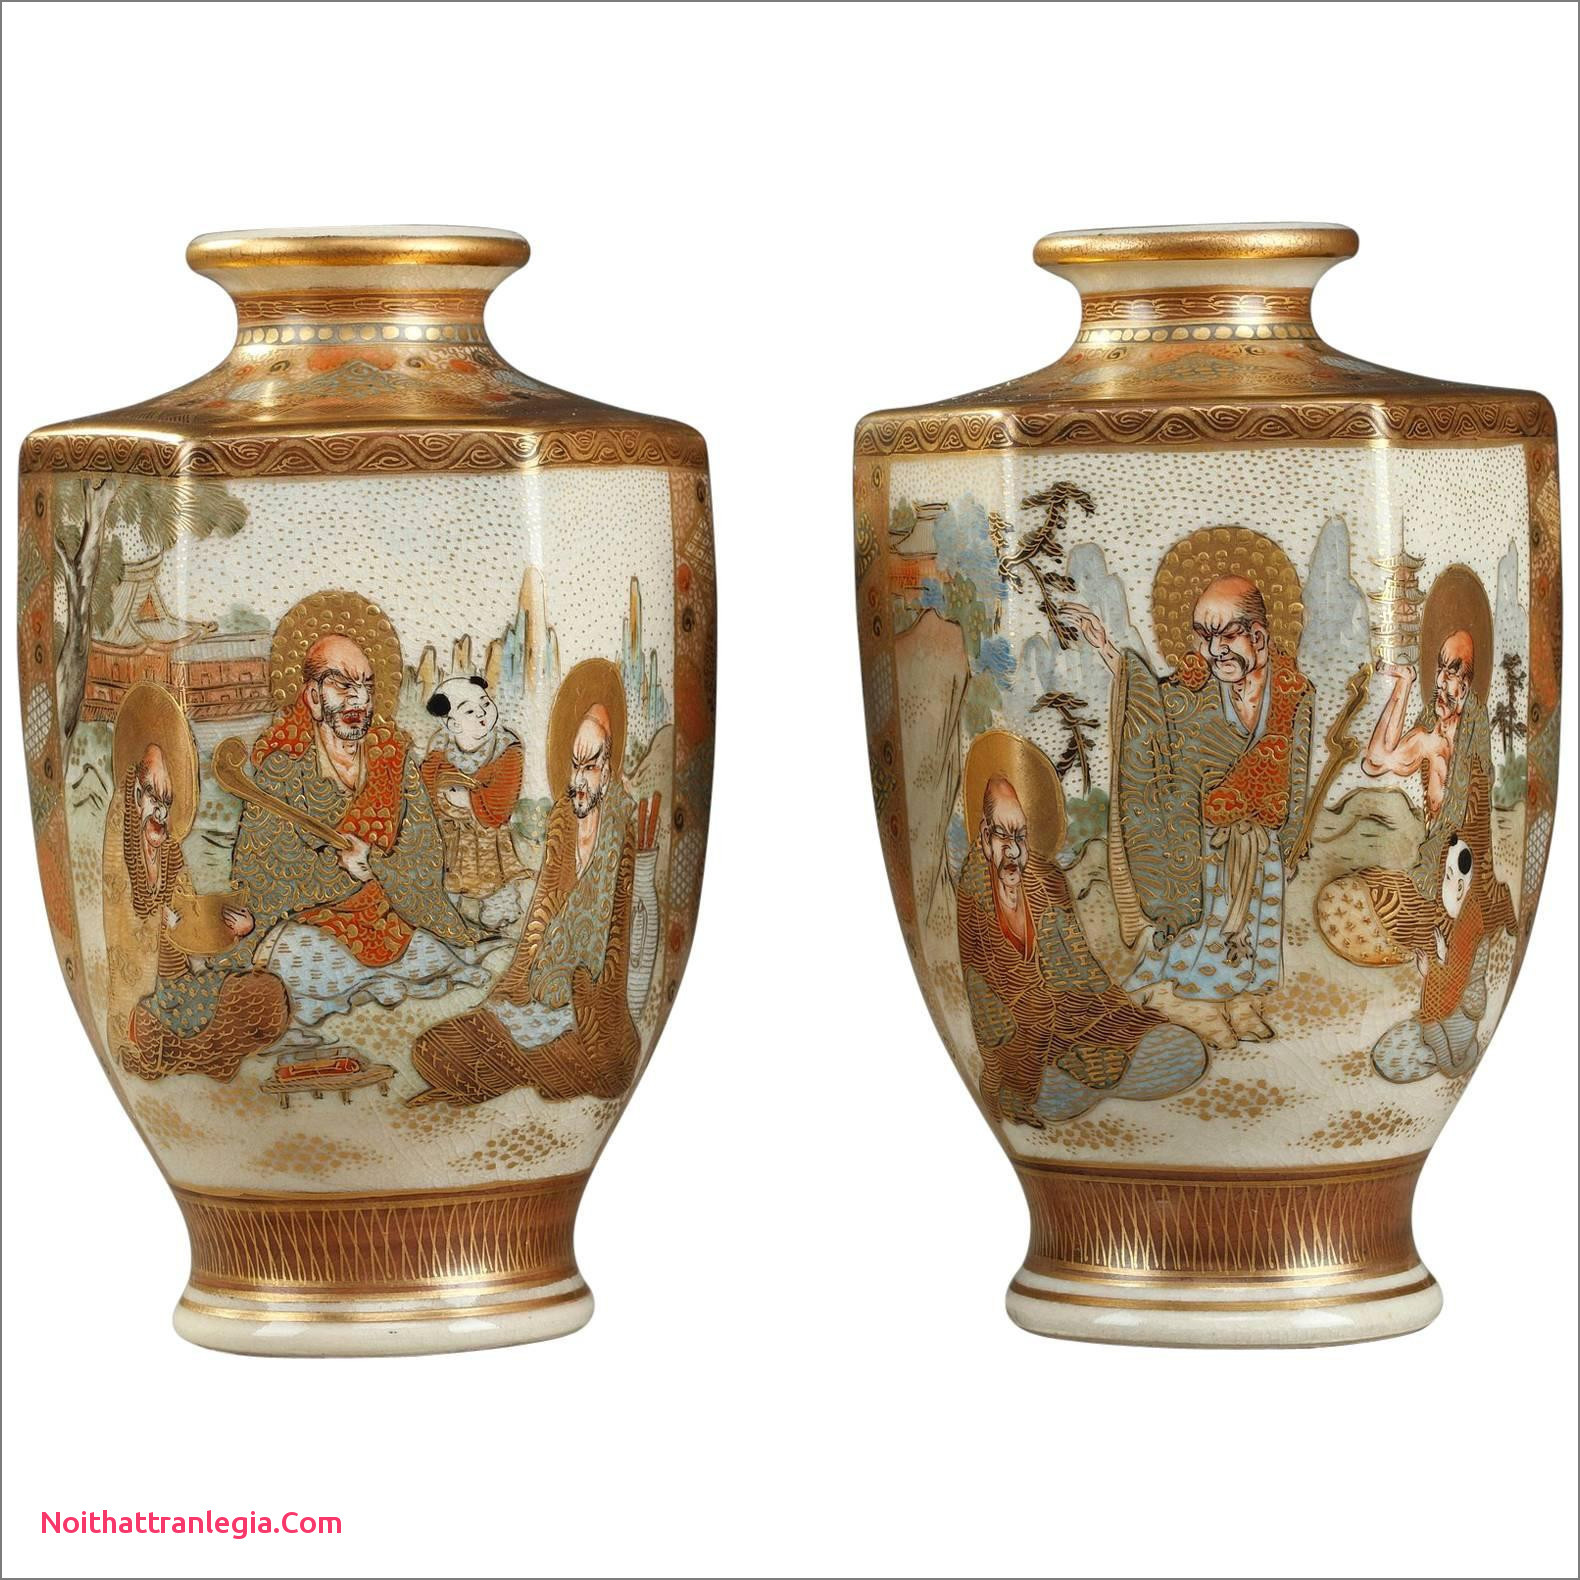 12 attractive Chinese Flower Vase 2024 free download chinese flower vase of 20 chinese antique vase noithattranlegia vases design intended for chinese ginger jar table lamps elegant pair 20th century general porcelain trenton nj usa industrial